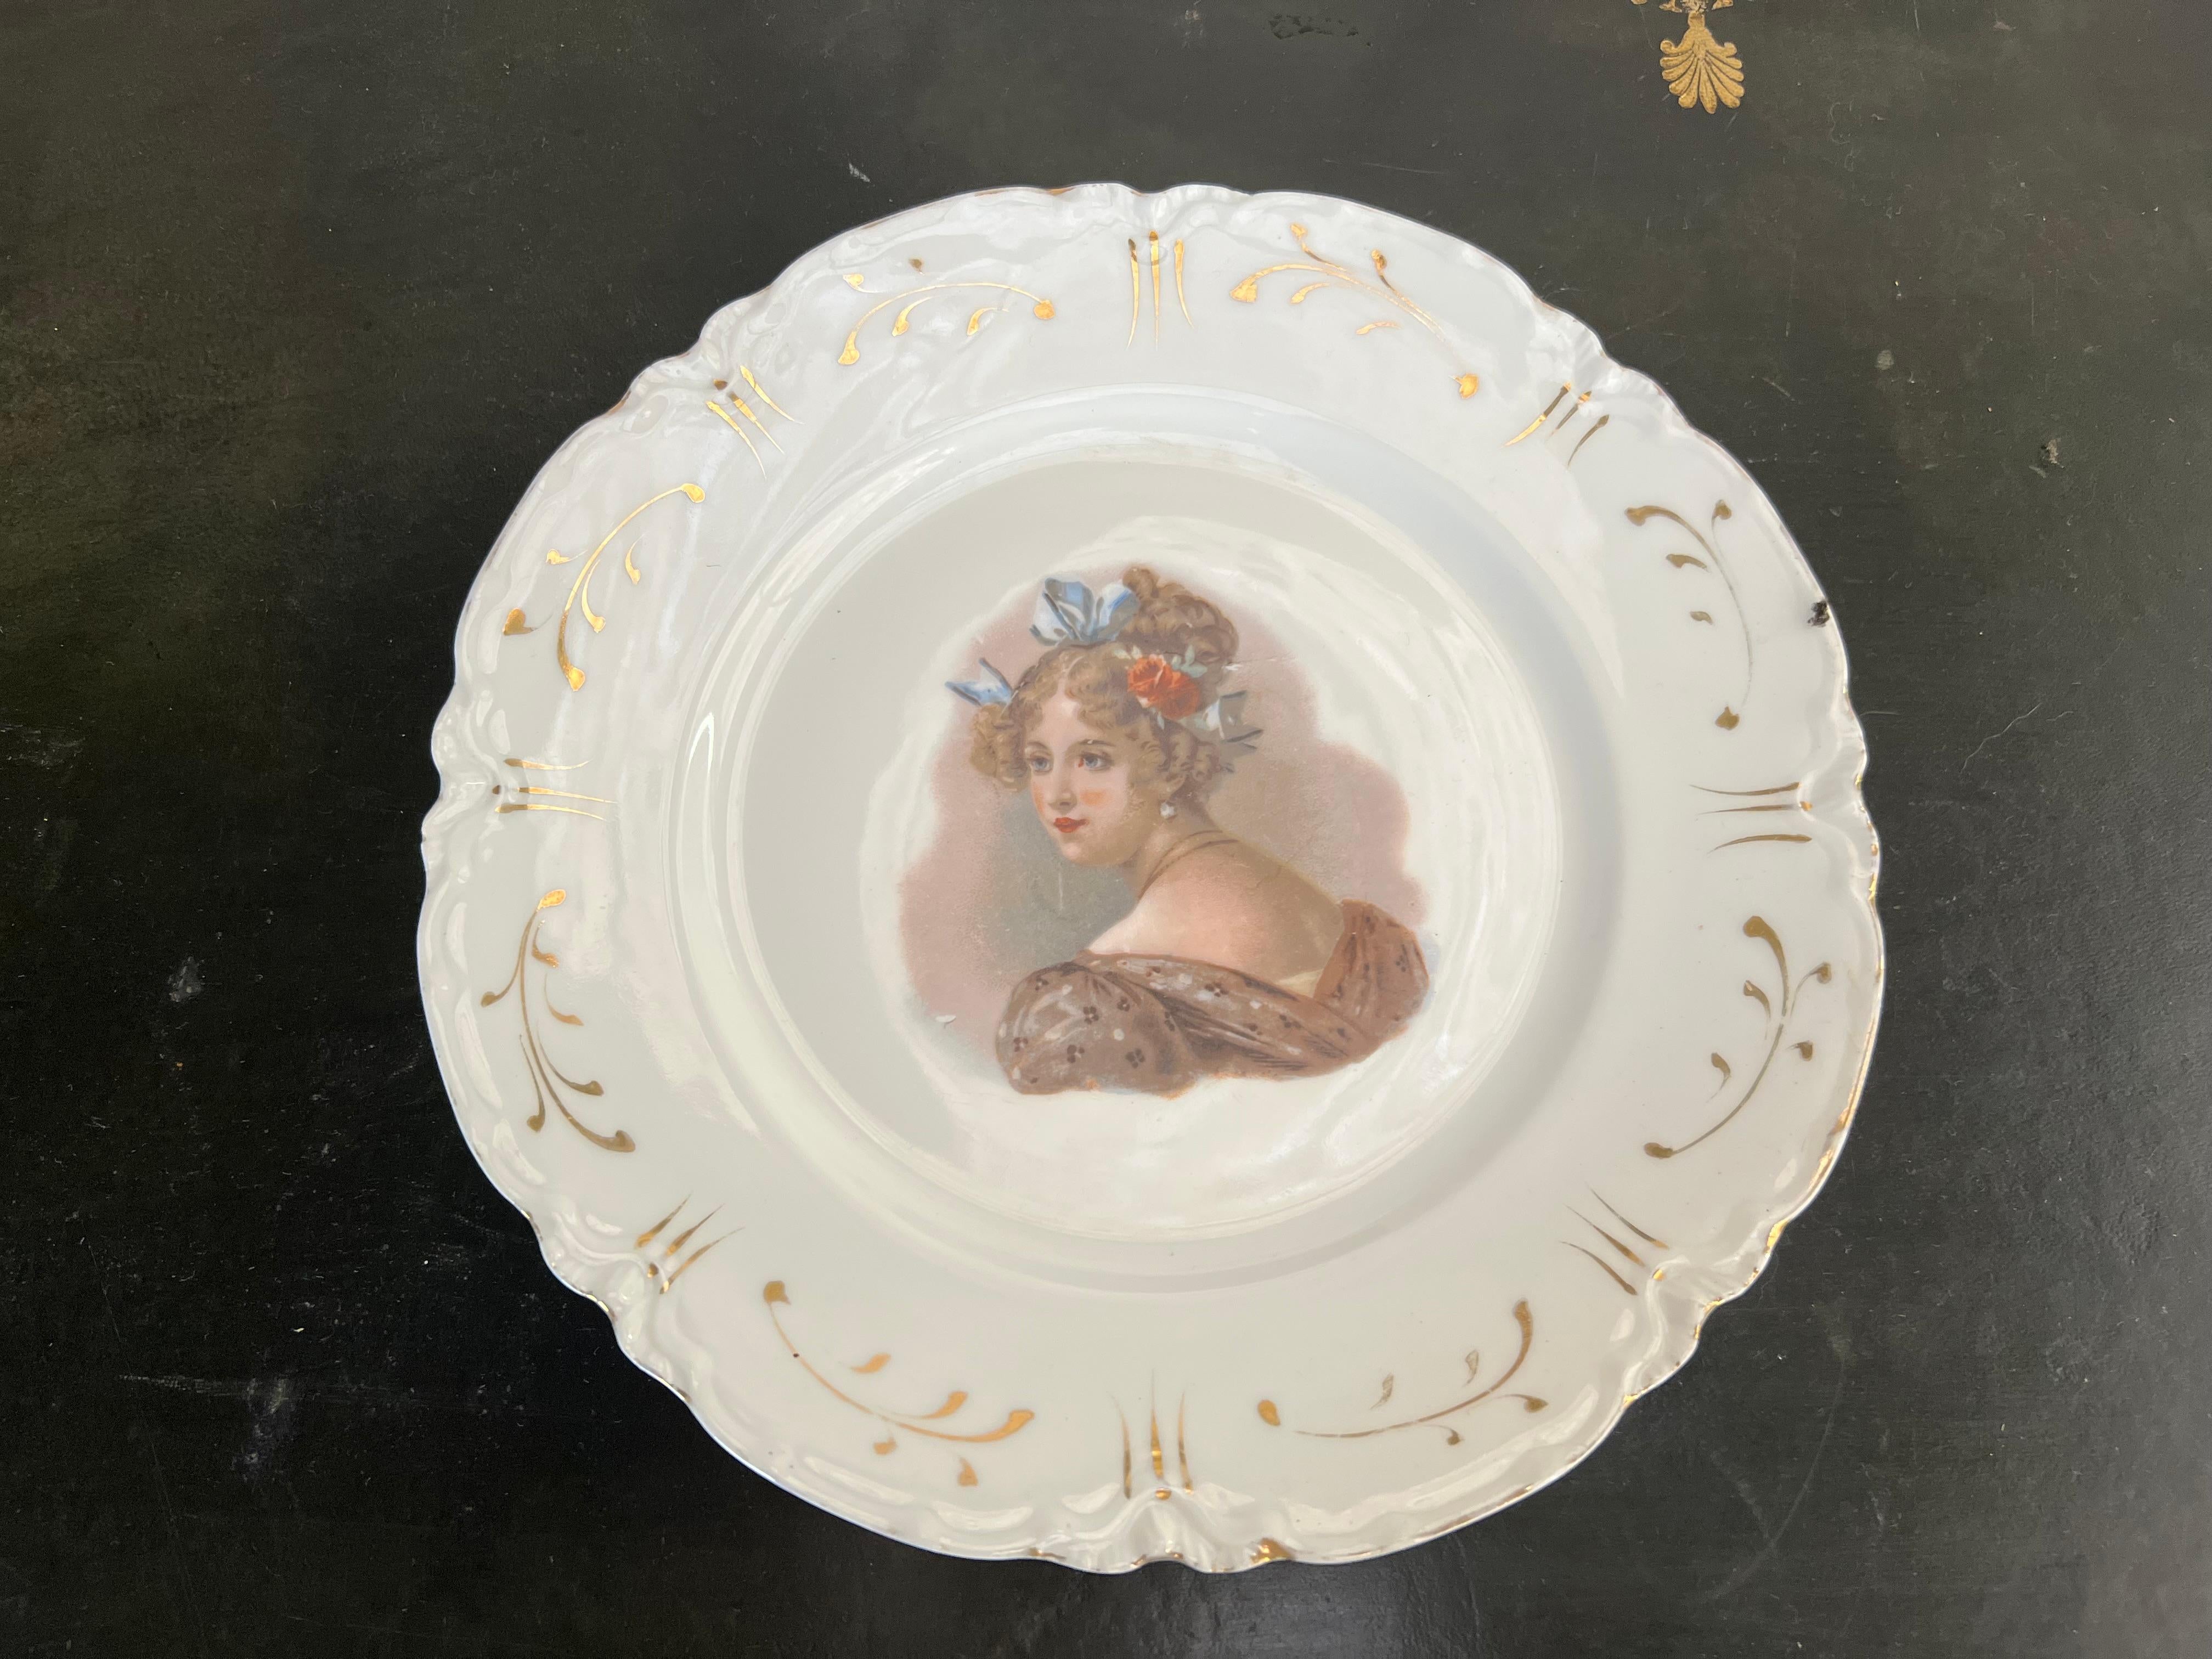 Set of five flat plates in Limoges porcelain from the Haviland manufacture. These collectible Haviland plates, dating back to the 19th century, showcase delicate porcelain paintings and gilding depicting portraits of young women, likely courtesans